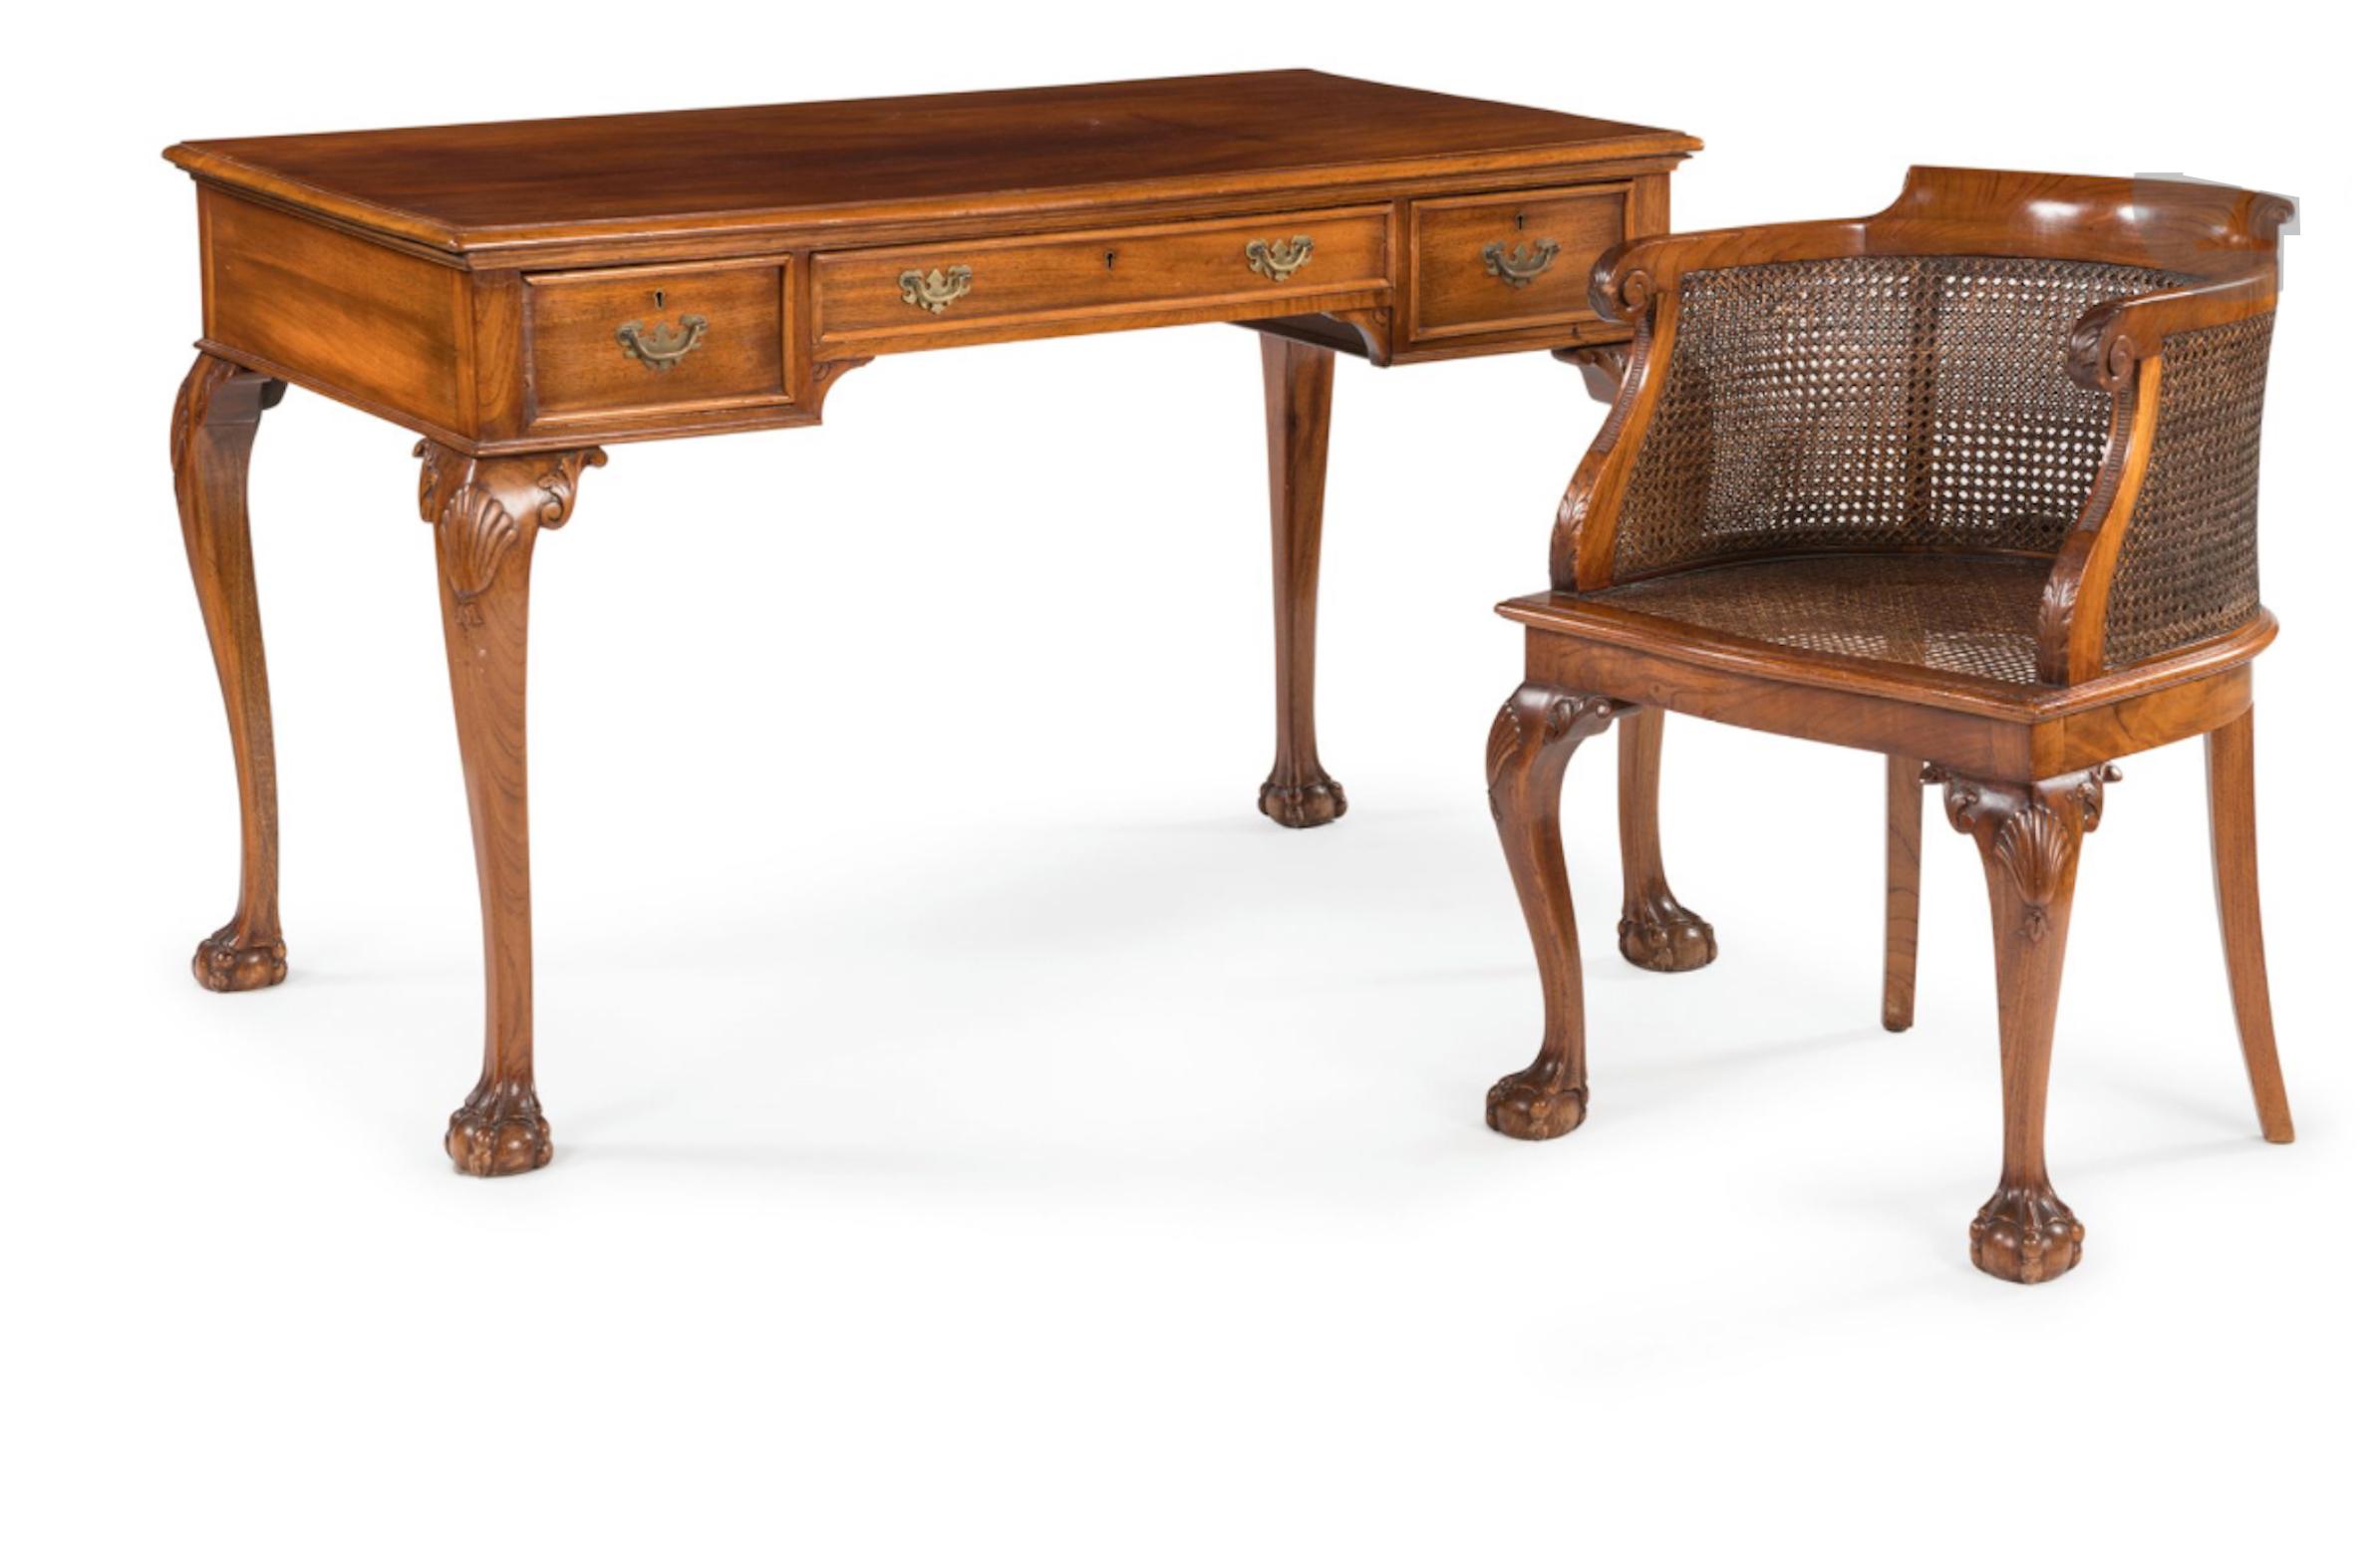 19th Century hand carved set of walnut writing desk resting on lion's paws with three front drawers and with matching armchair covered with cane.
Very good original condition with no restorations ever made.
England, circa 1880.